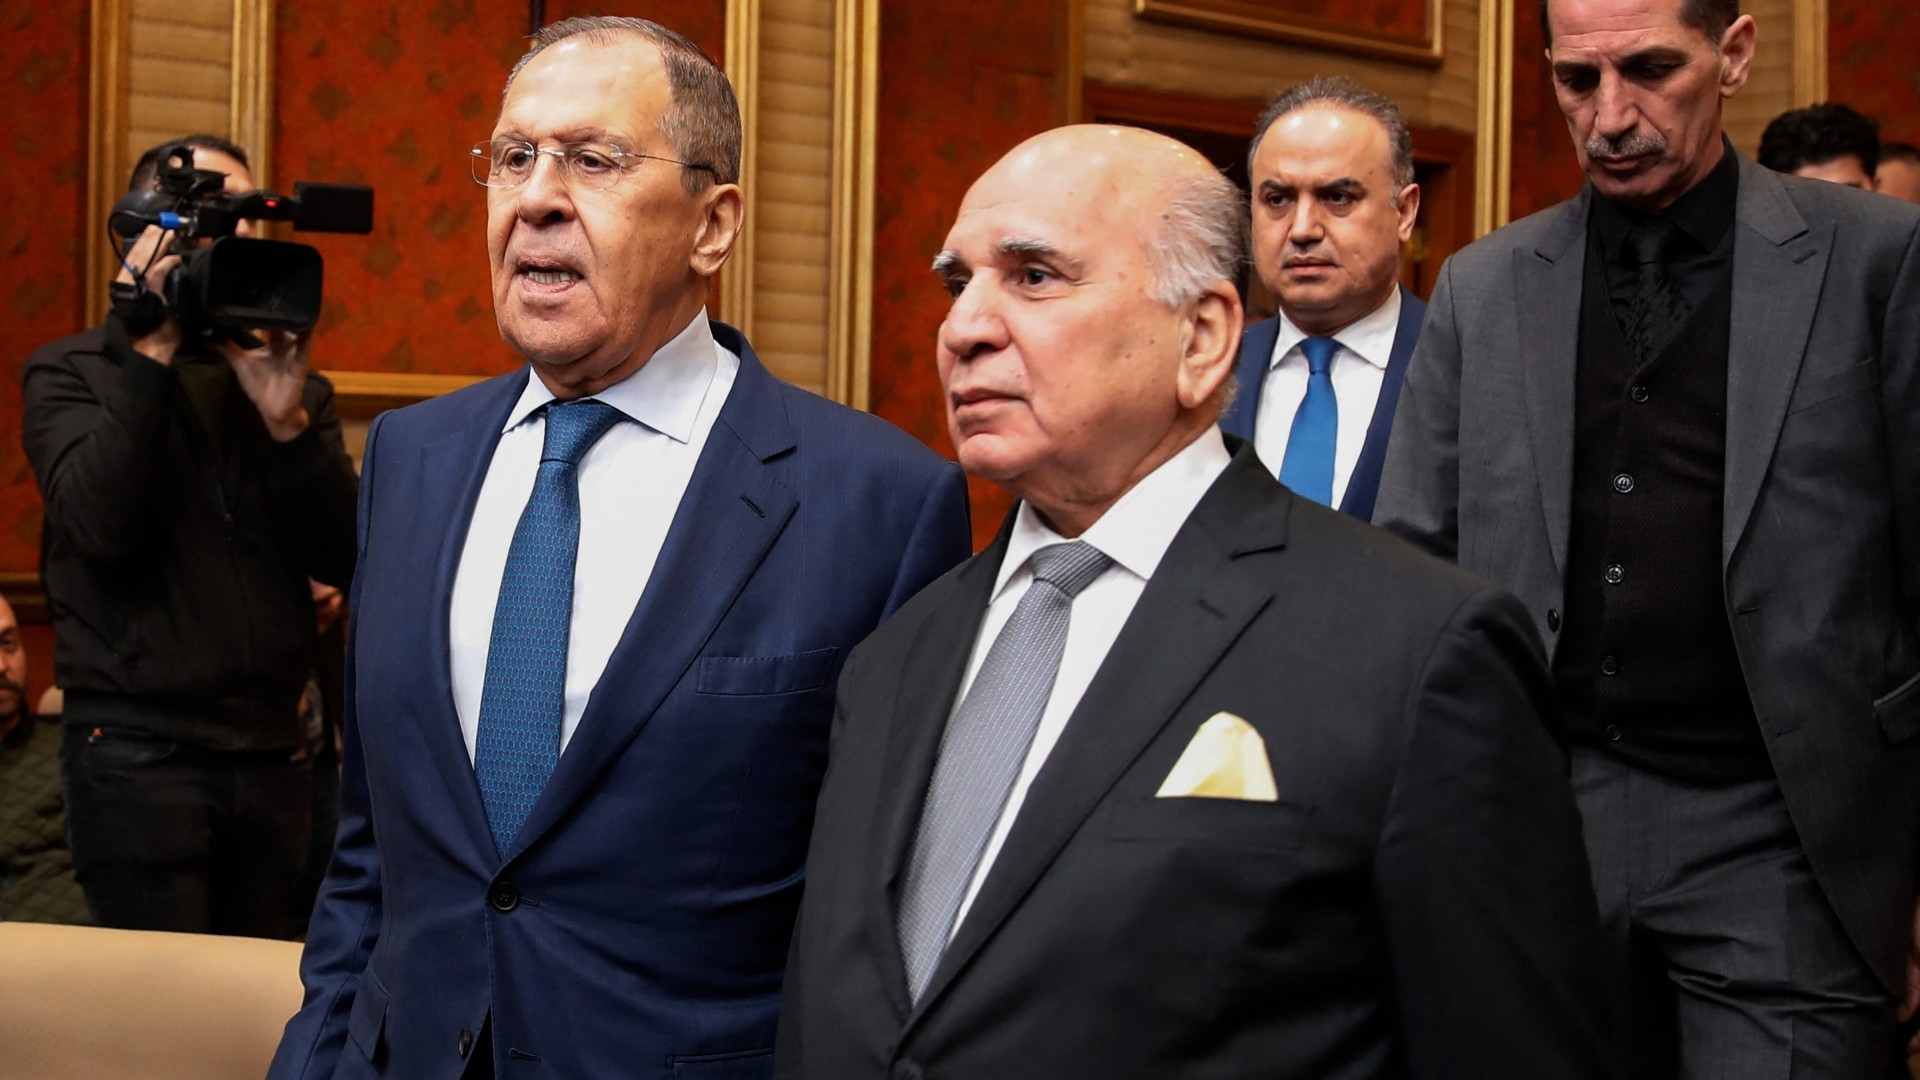 Iraqi Foreign Minister Fuad Hussein and his Russian counterpart Sergei Lavrov arrive to hold a news conference in Baghdad on 6 February (AFP)